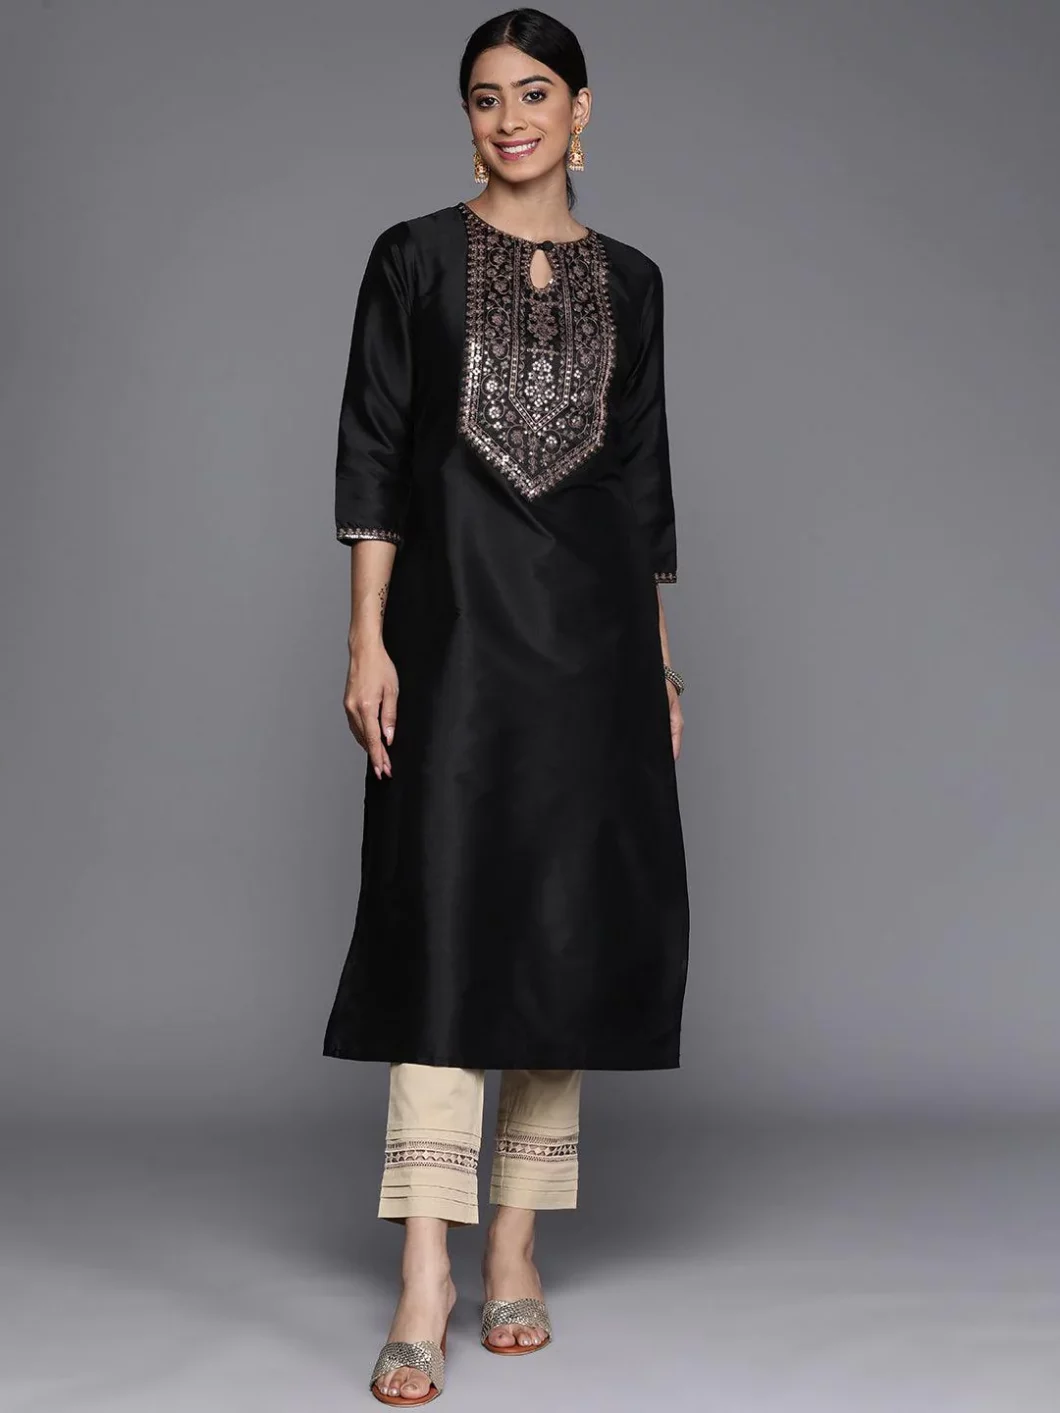 5 Different Black Kurta Styles Which Will Make You Standout in Any Occasion